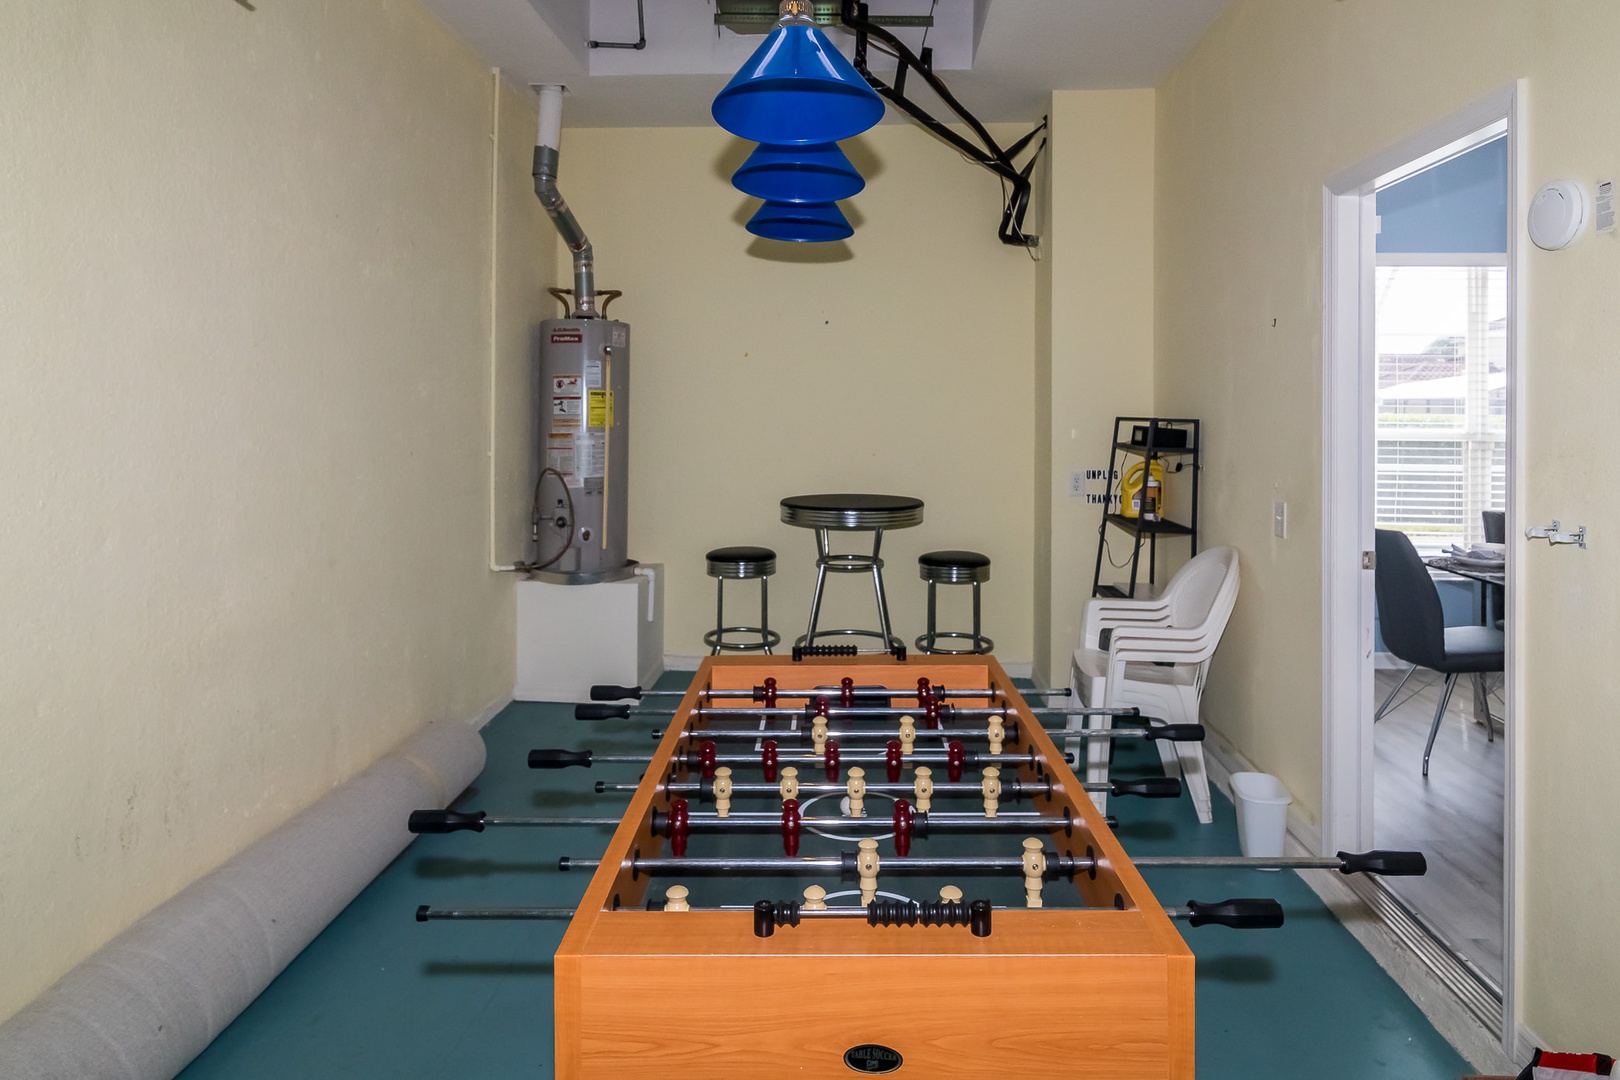 Game room with foosball table (garage)